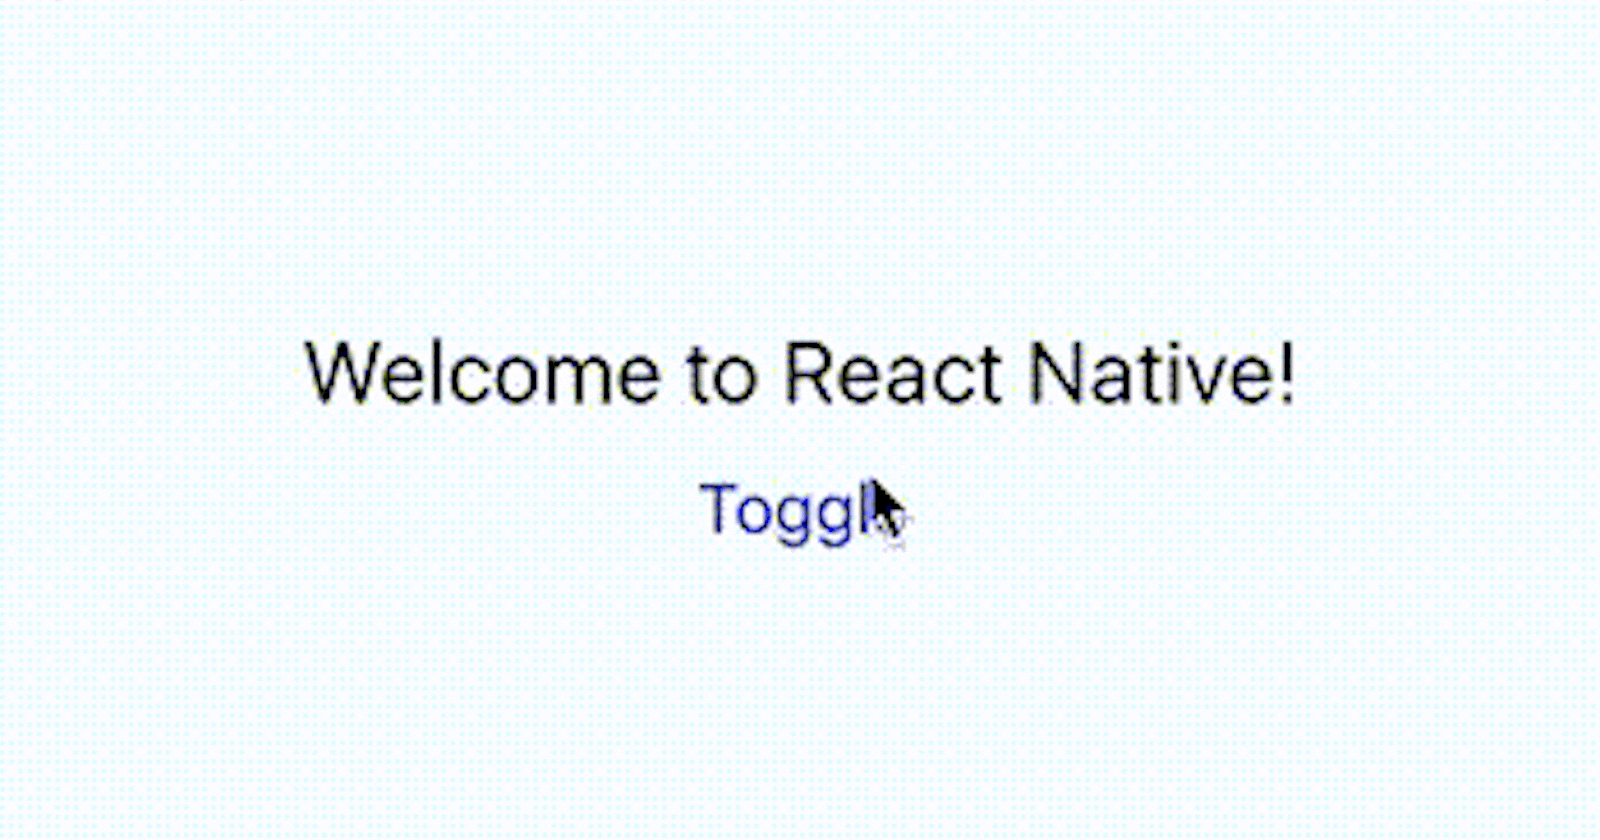 Animating appearance & disappearance in React Native